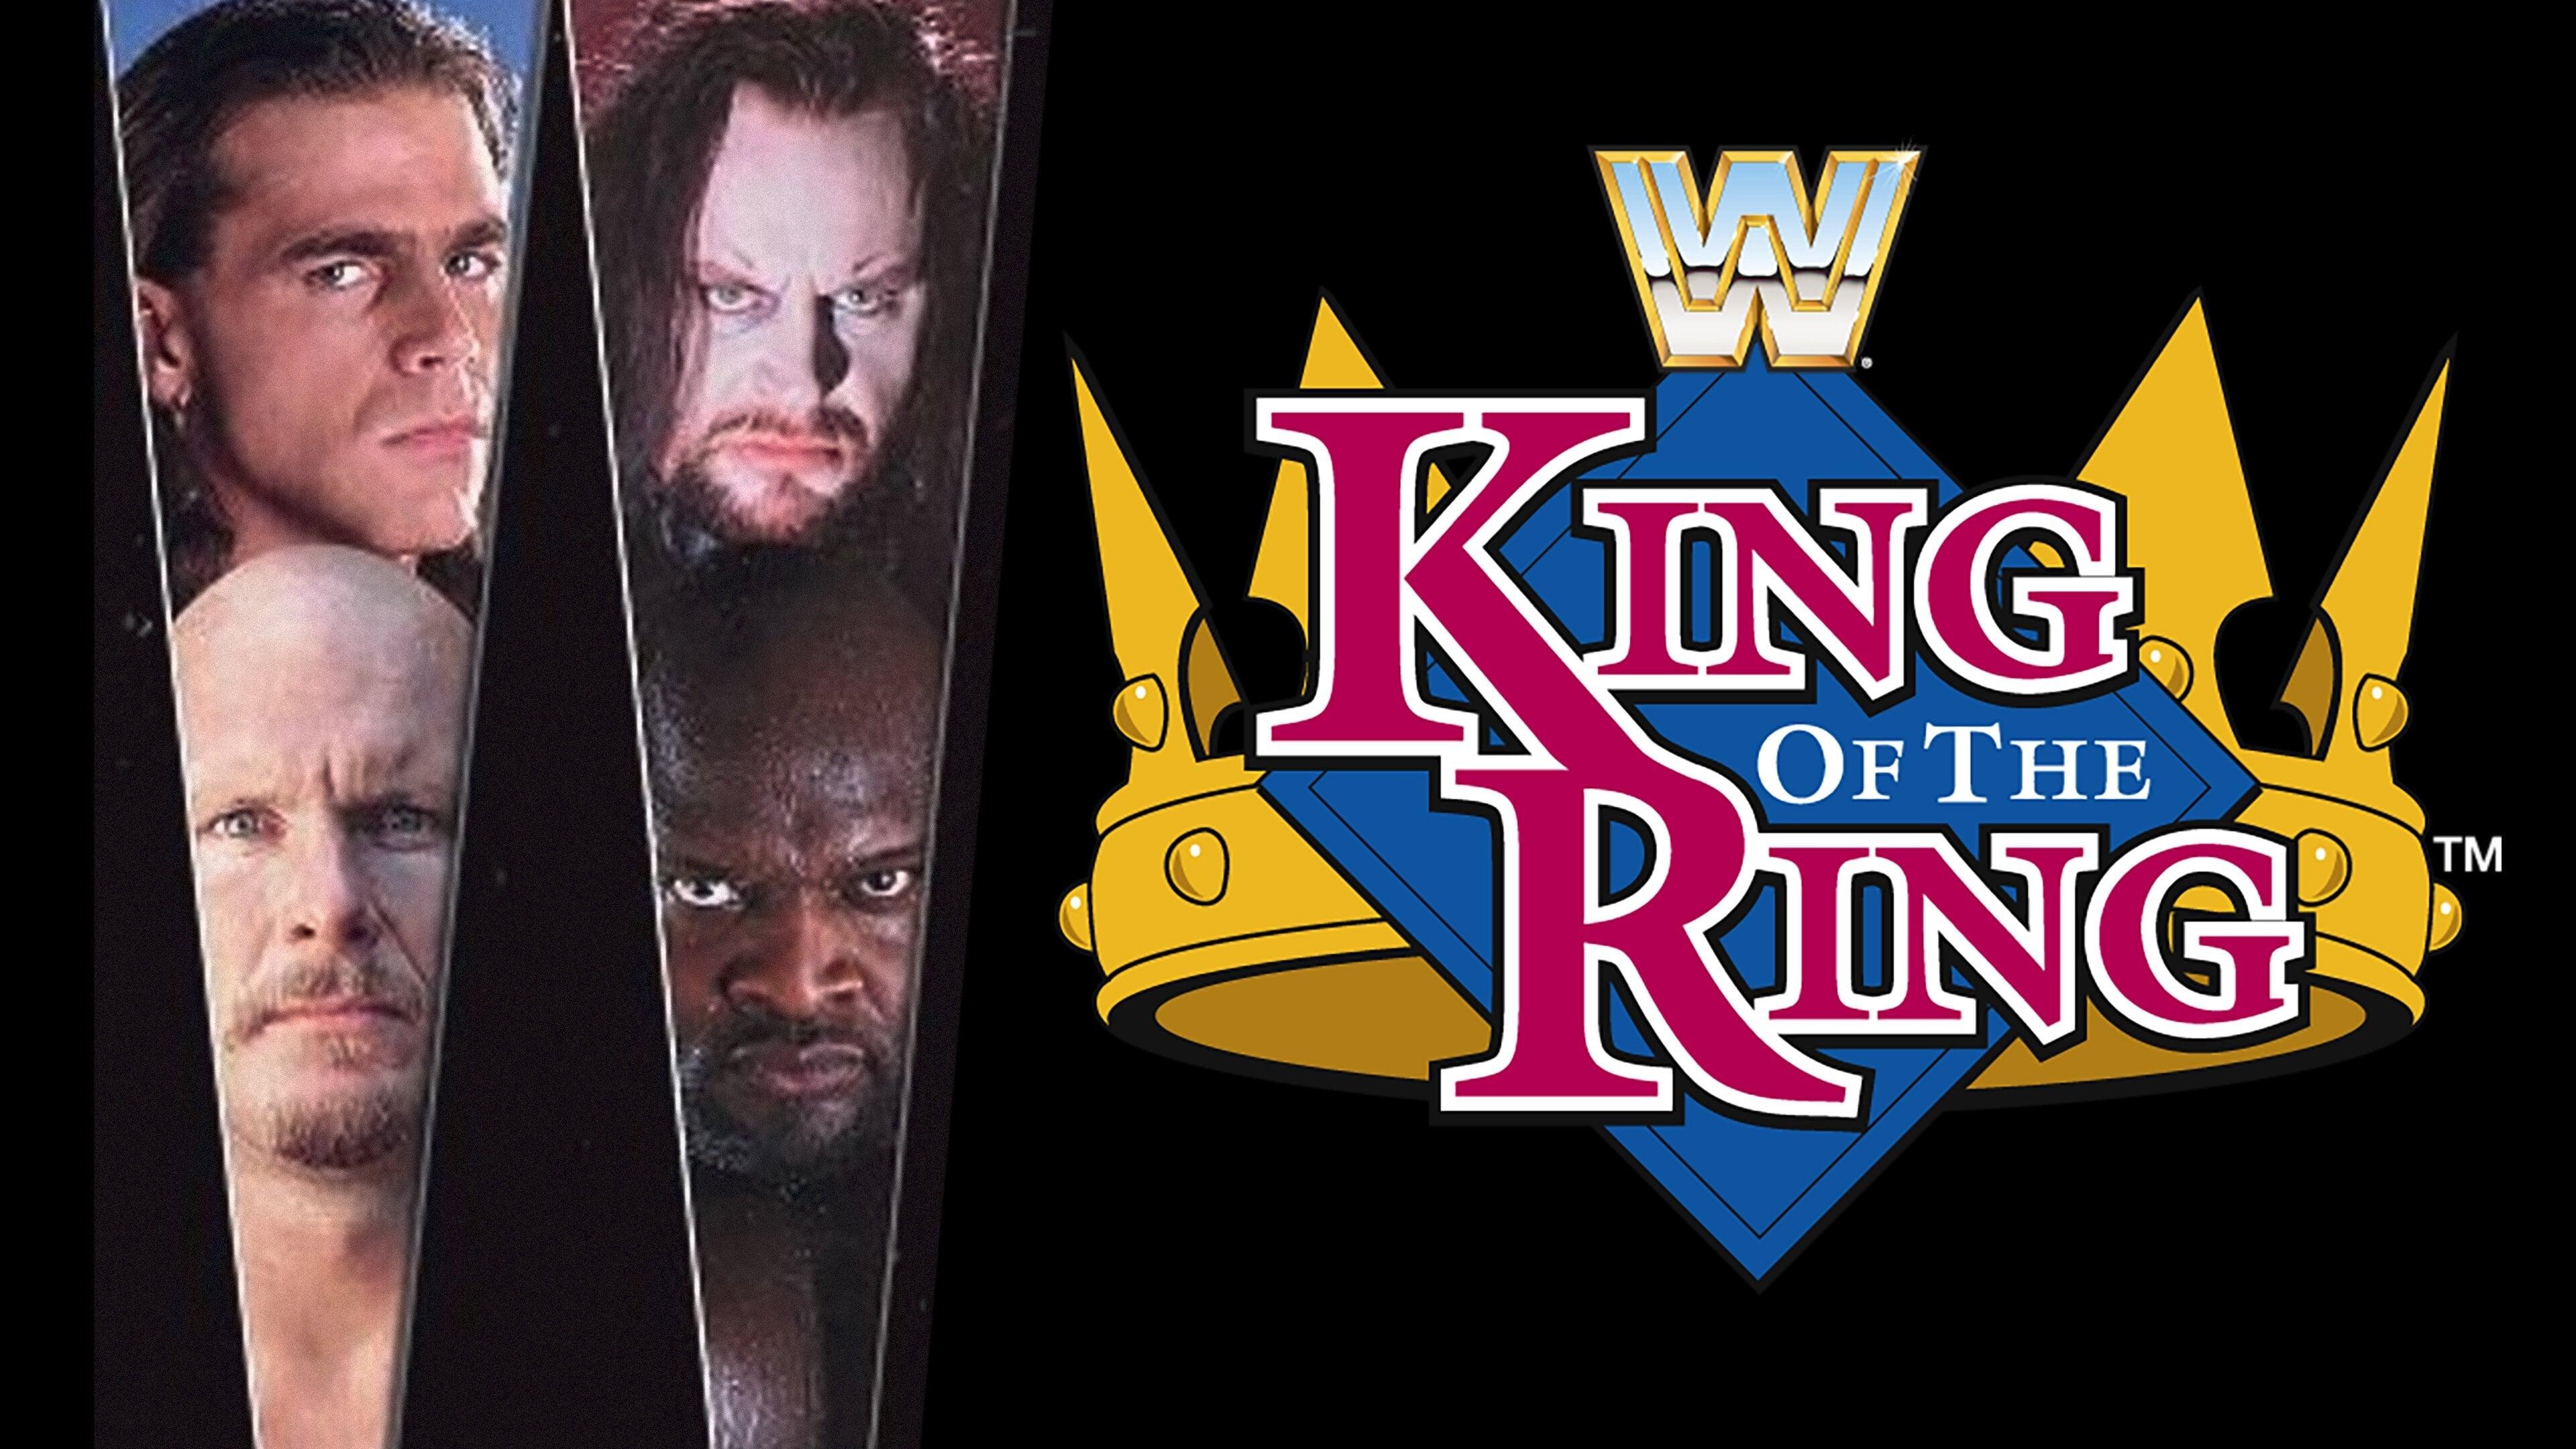 WWE King of the Ring 1997 backdrop